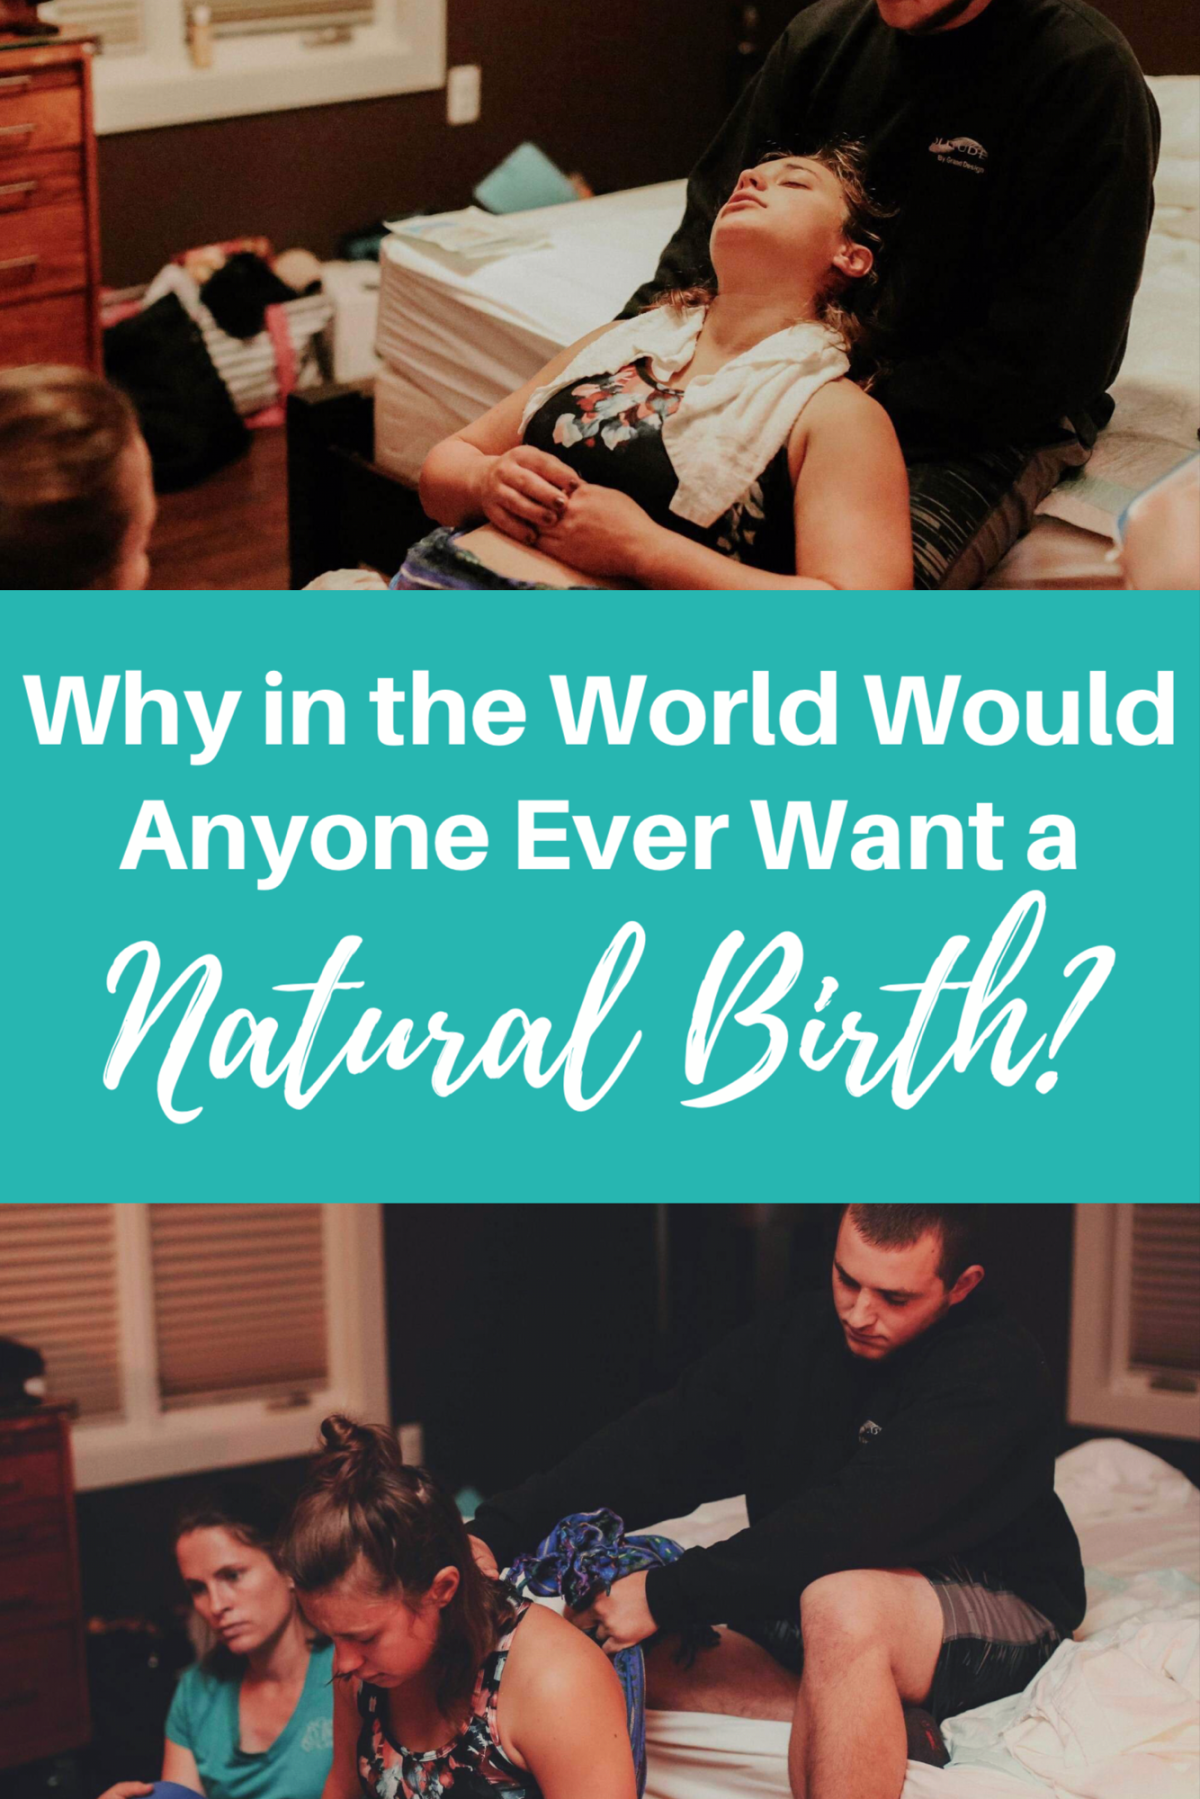 Why in the world would anyone ever want a natural birth?